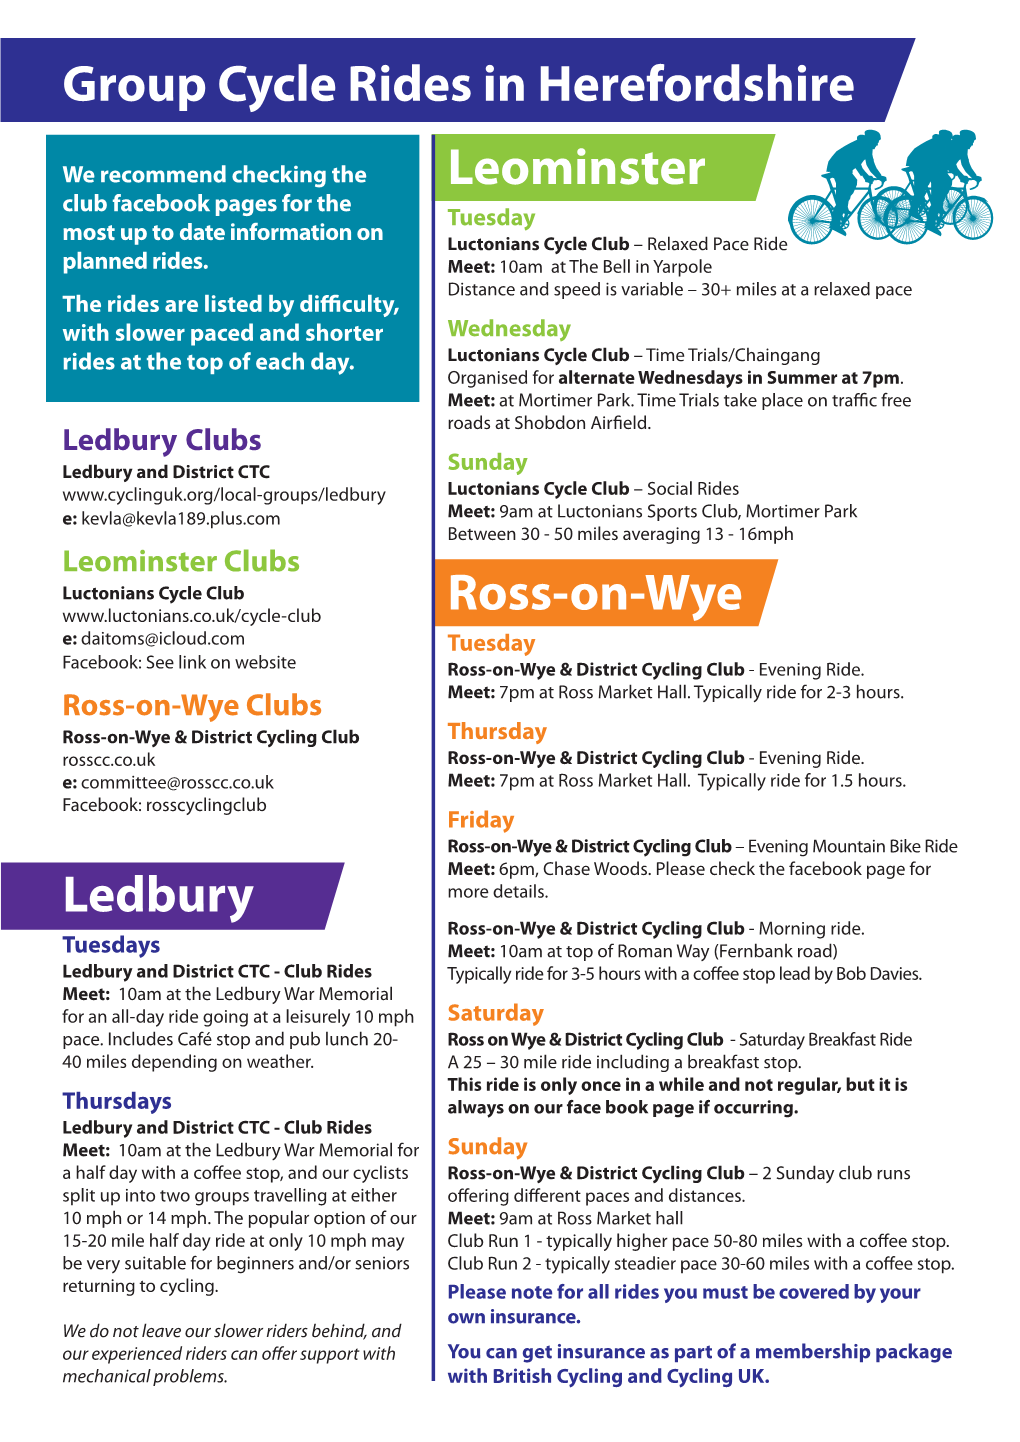 Group Cycle Rides in Ledbury, Leominster and Ross-On-Wye